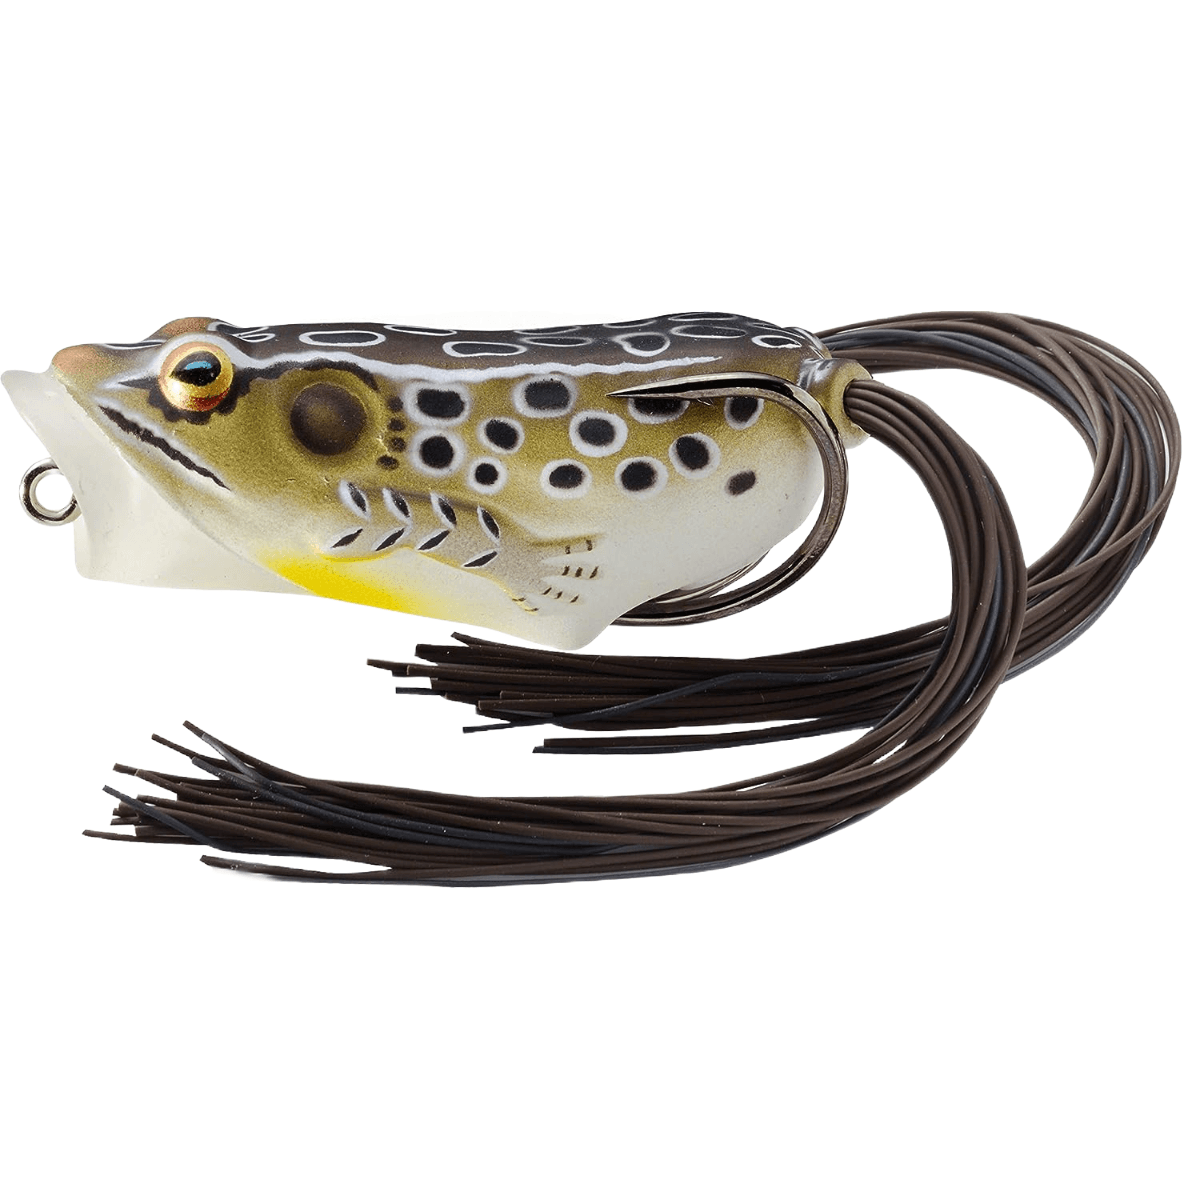 Up to 28% Off LIVETARGET Hollow Body Popping Frog - Wired2Fish